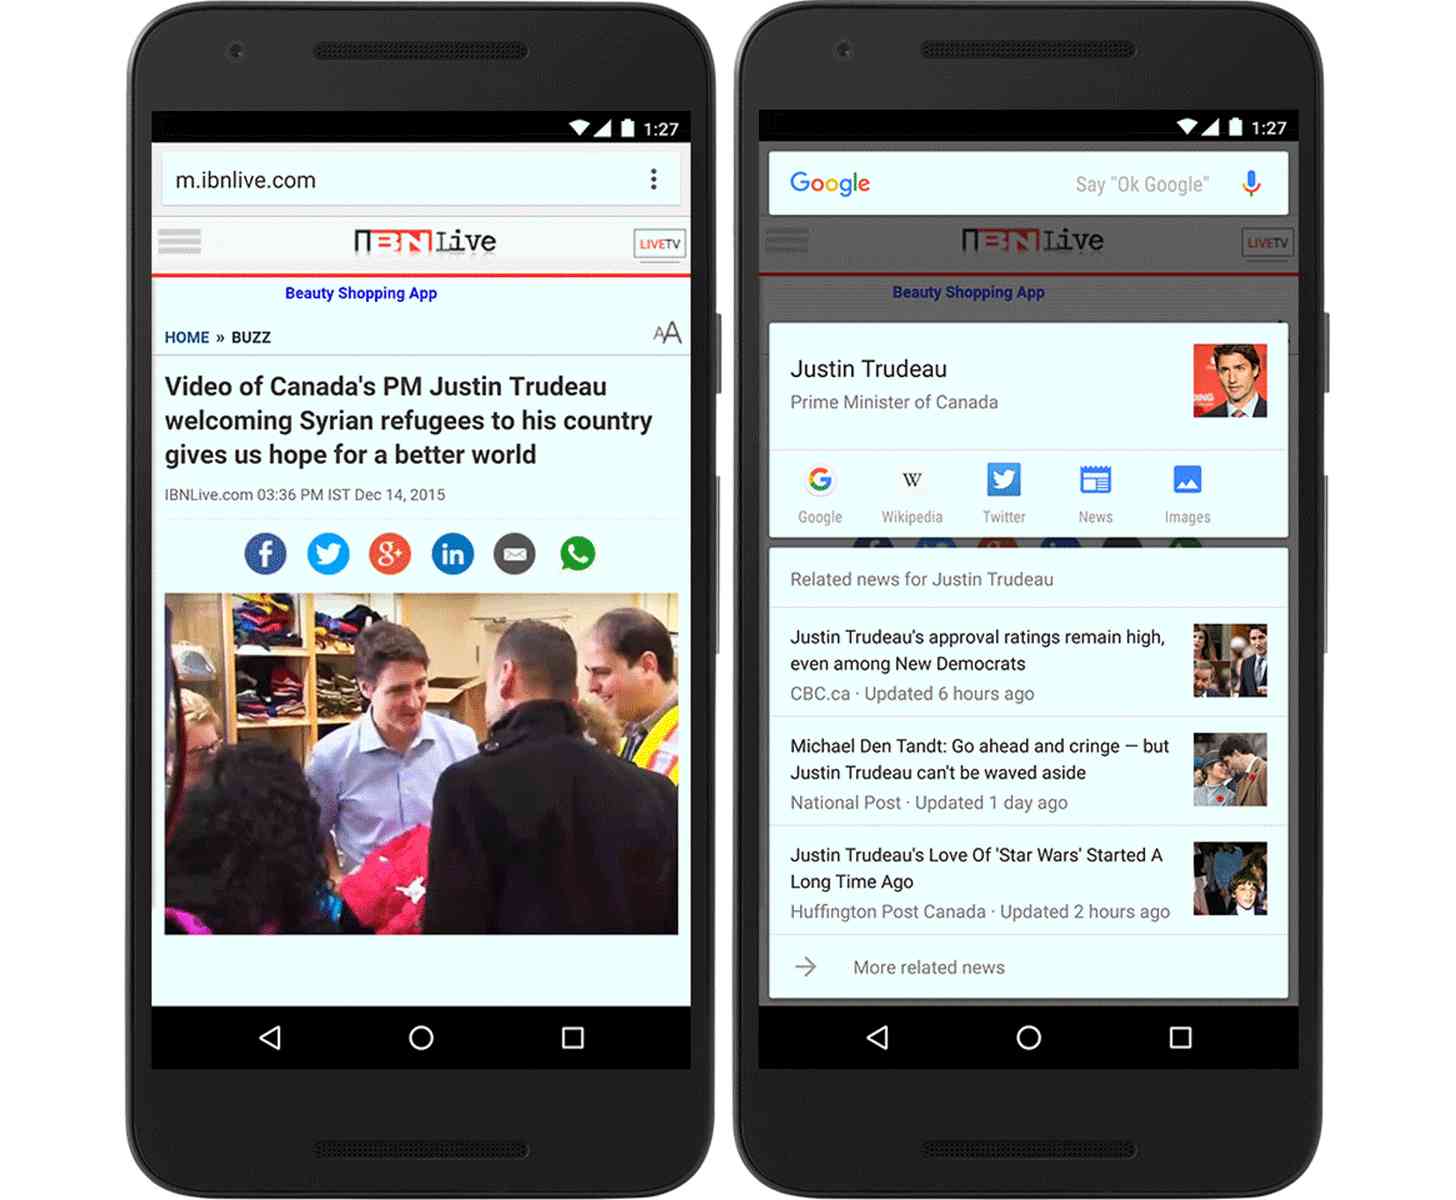 Google Now on Tap related news